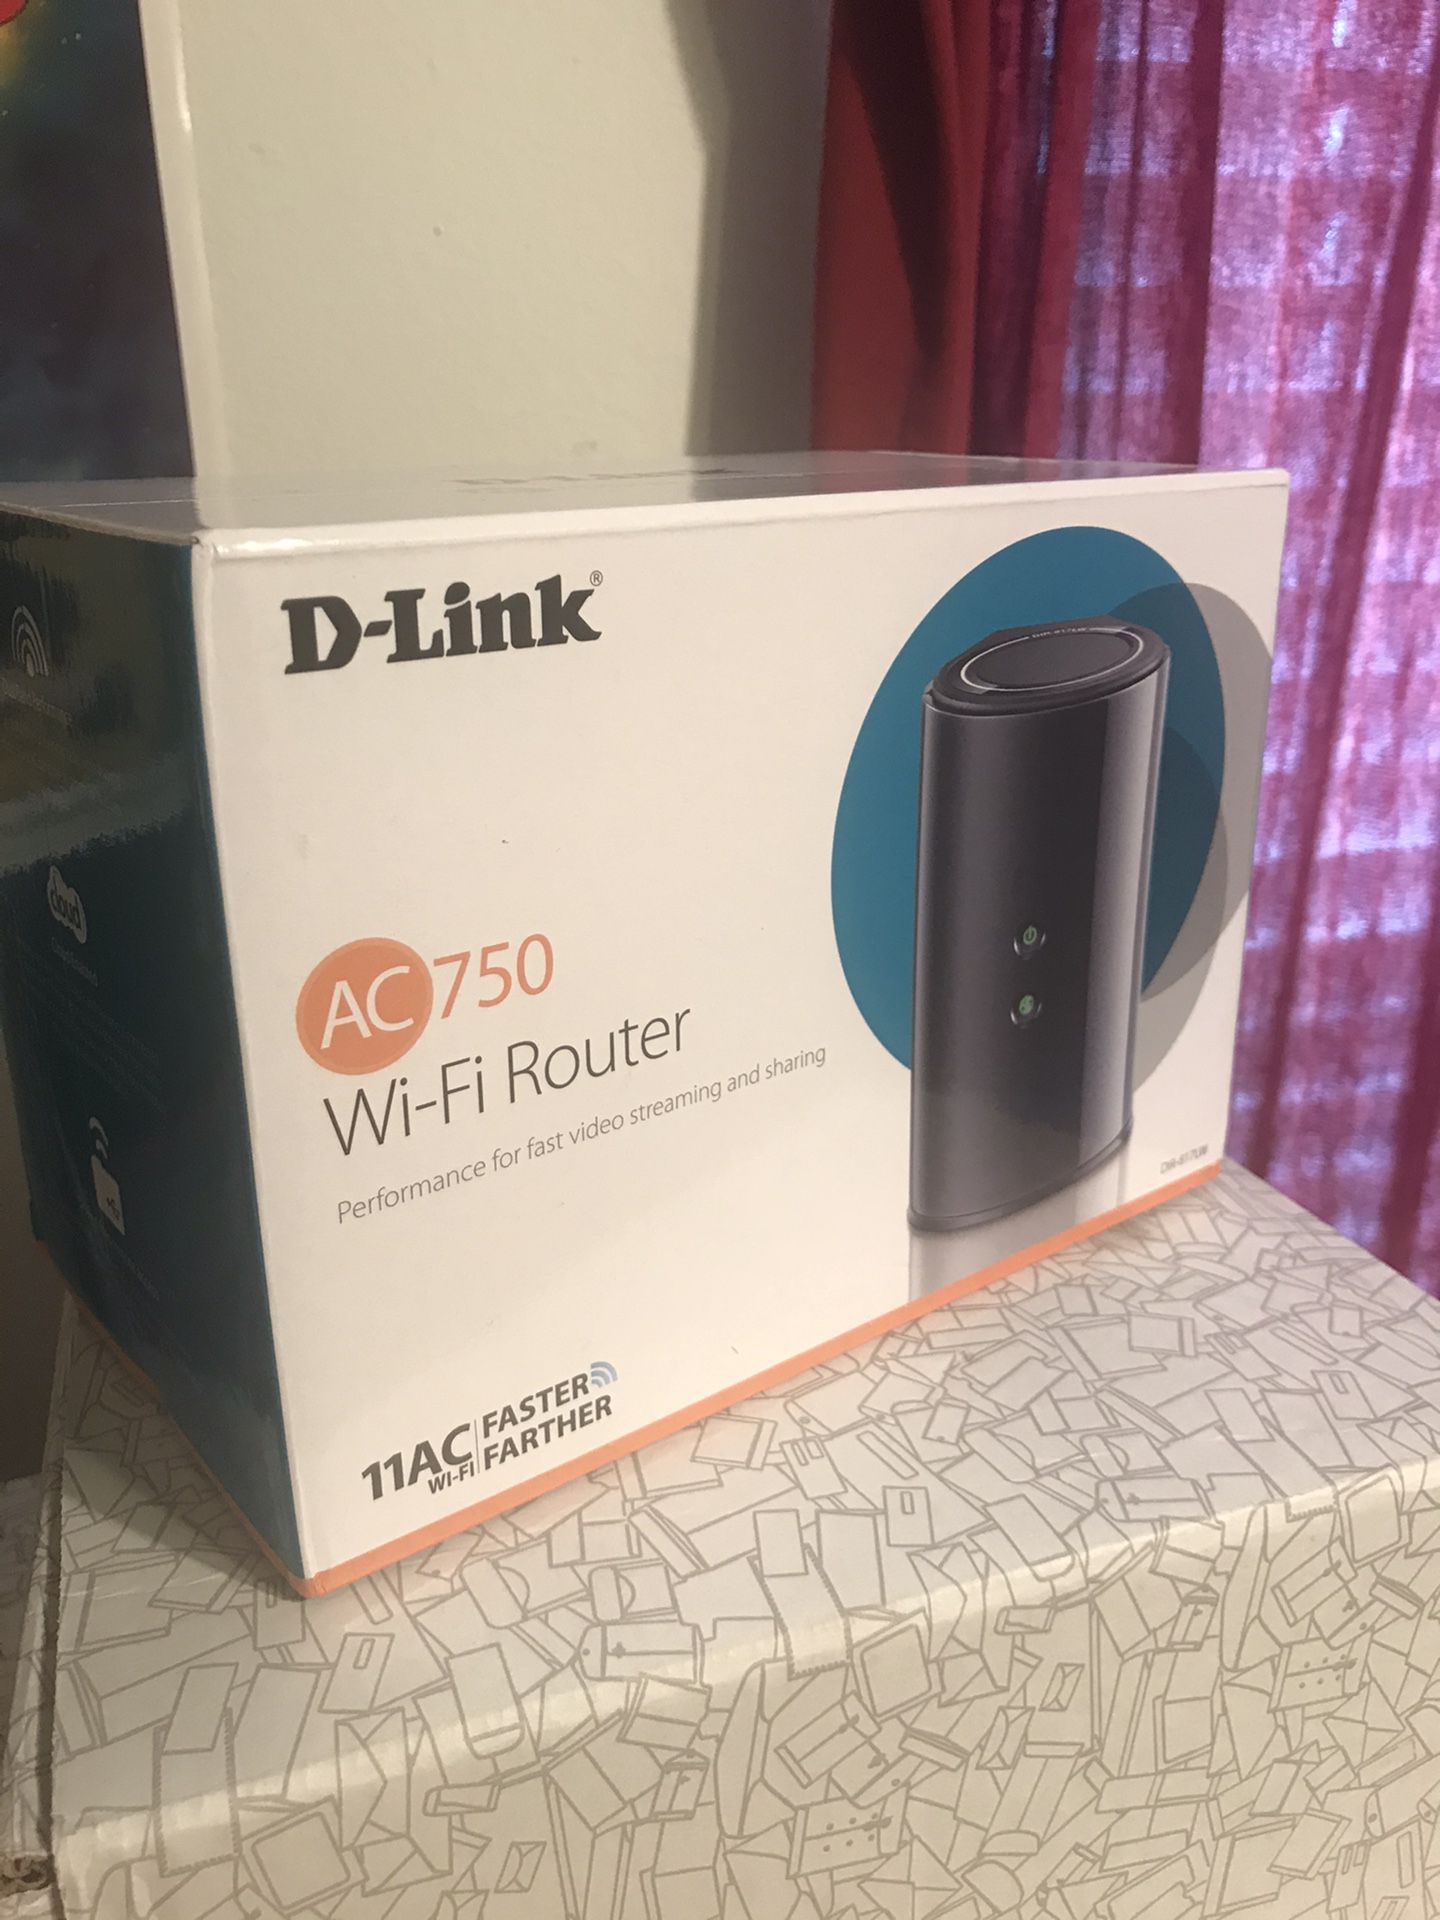 D’Link wifi router new in box